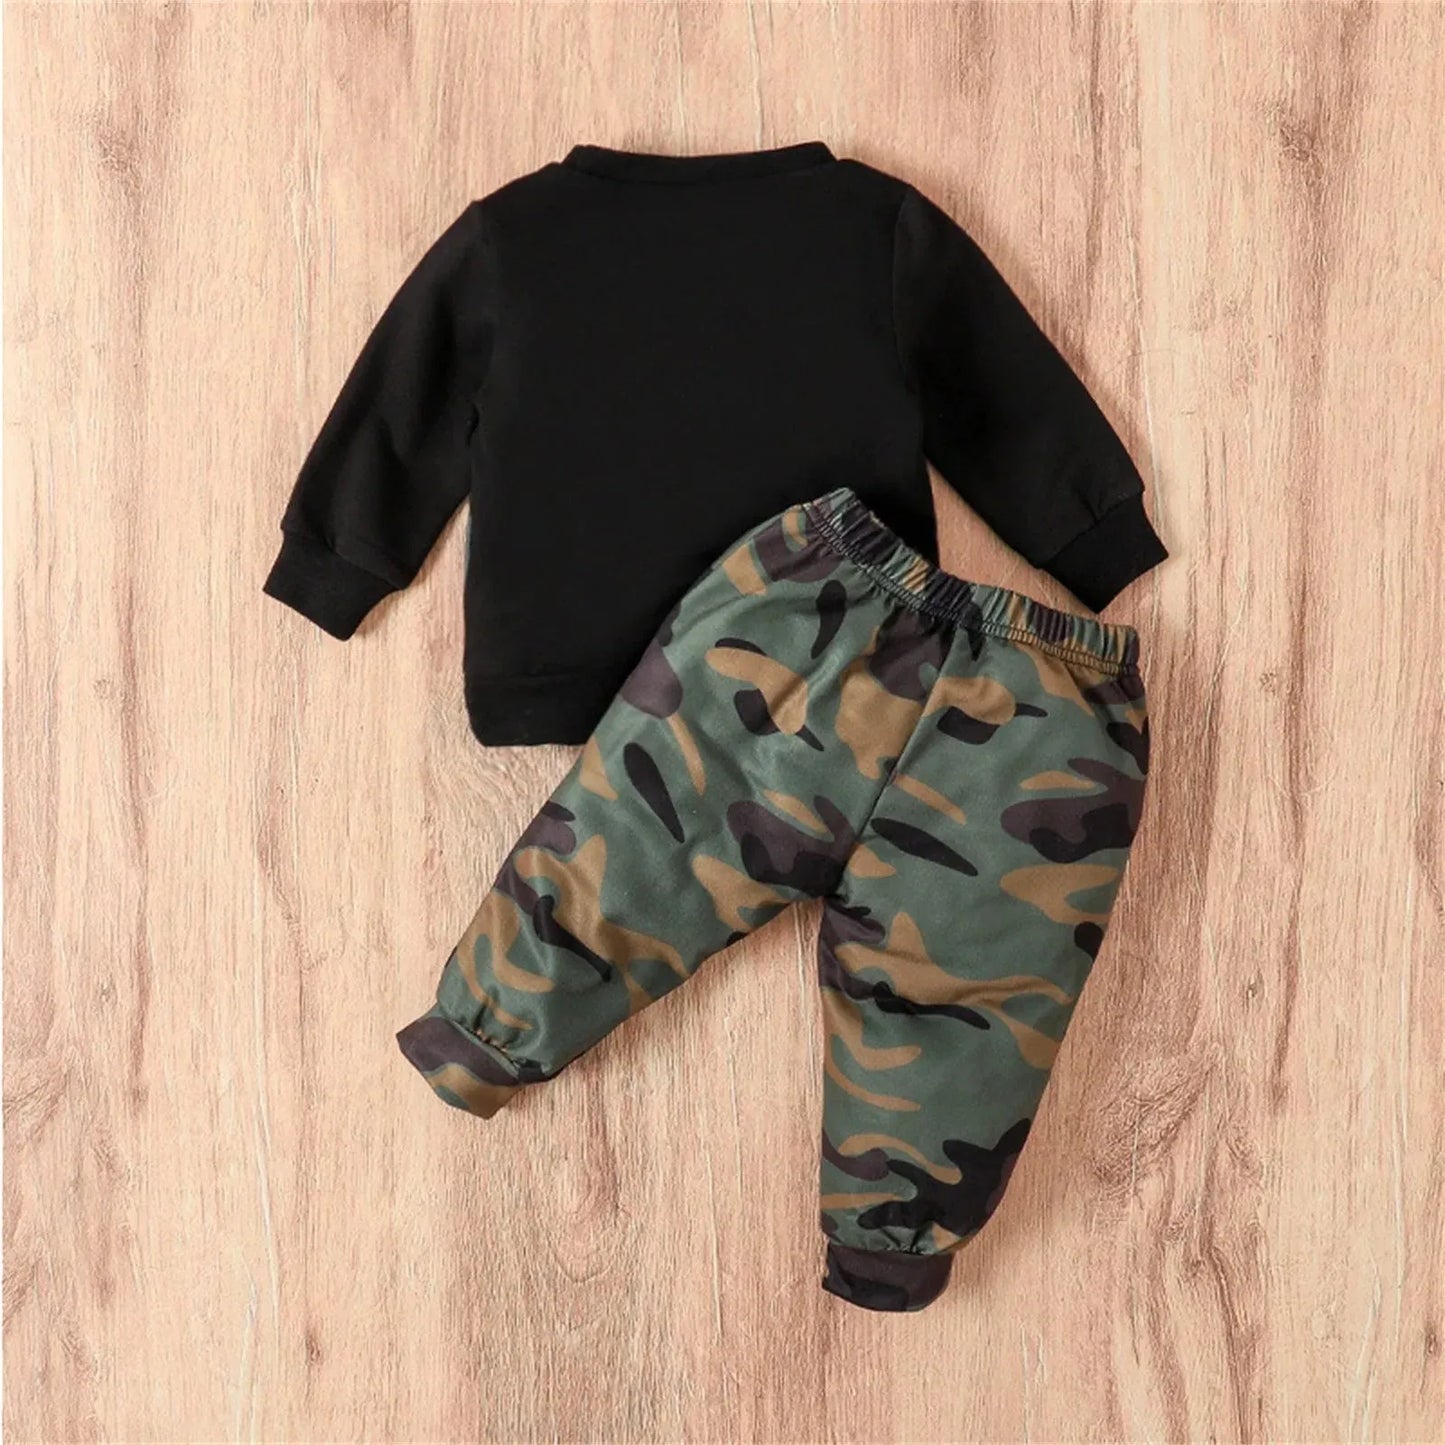 newborn camouflage outfit